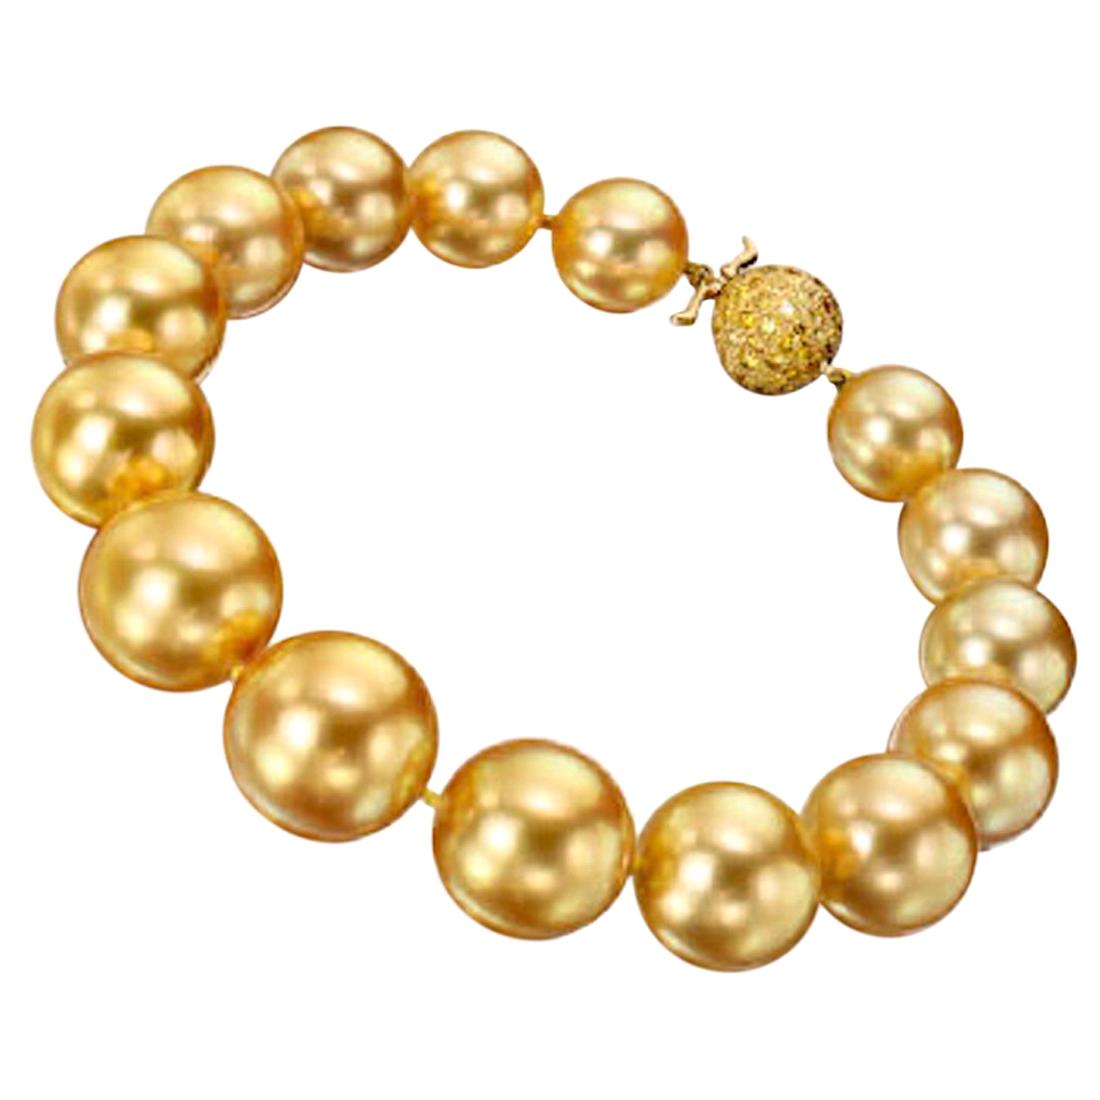 15 true gem natural - not dyed - color, deep golden South Sea pearls slightly graduating in size, from 10.5 up to 14.35 mm.  The color is a vibrant deep gold color, the skins are clean with fine deep luster and these spherical pearls are well